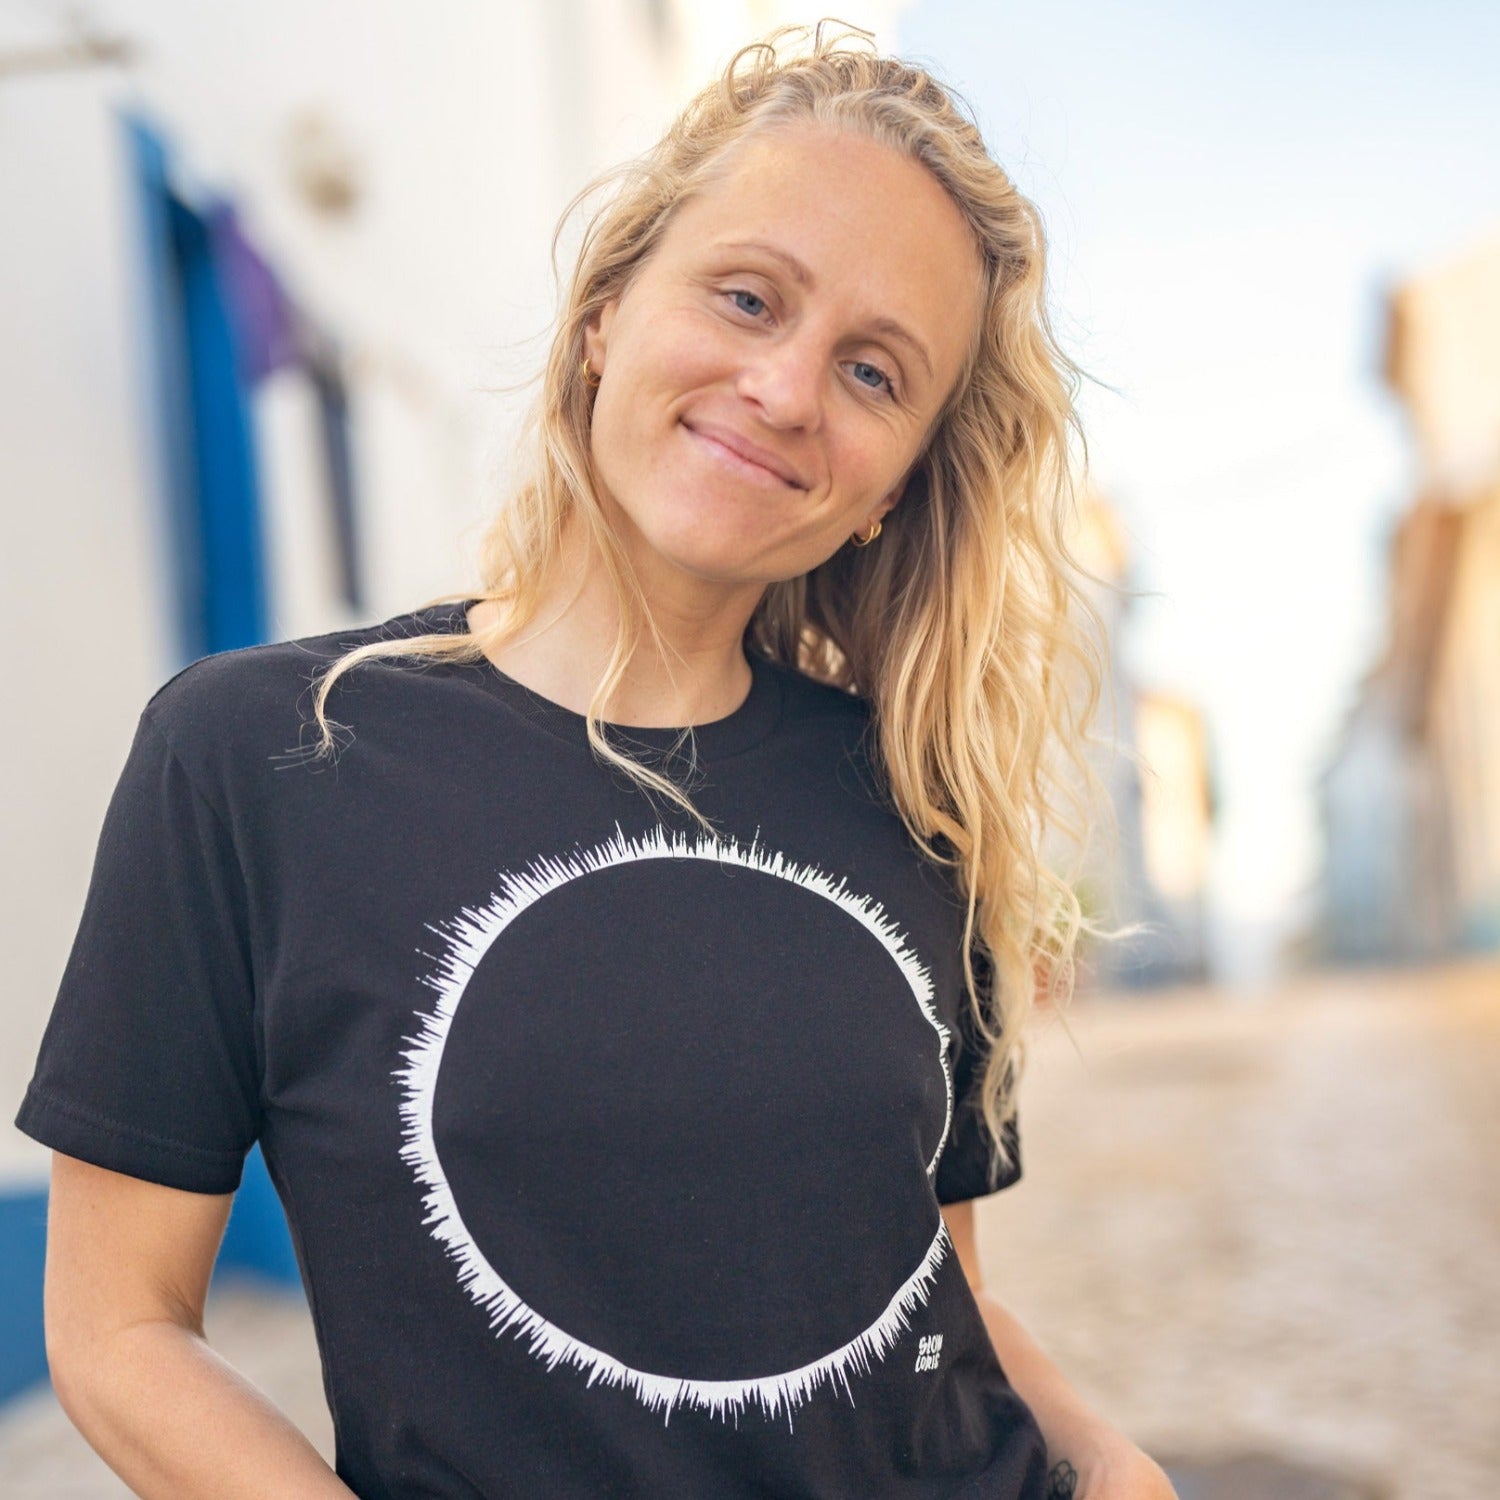 Close up of woman with long hair wearing black t-shirt with white eclipse print.